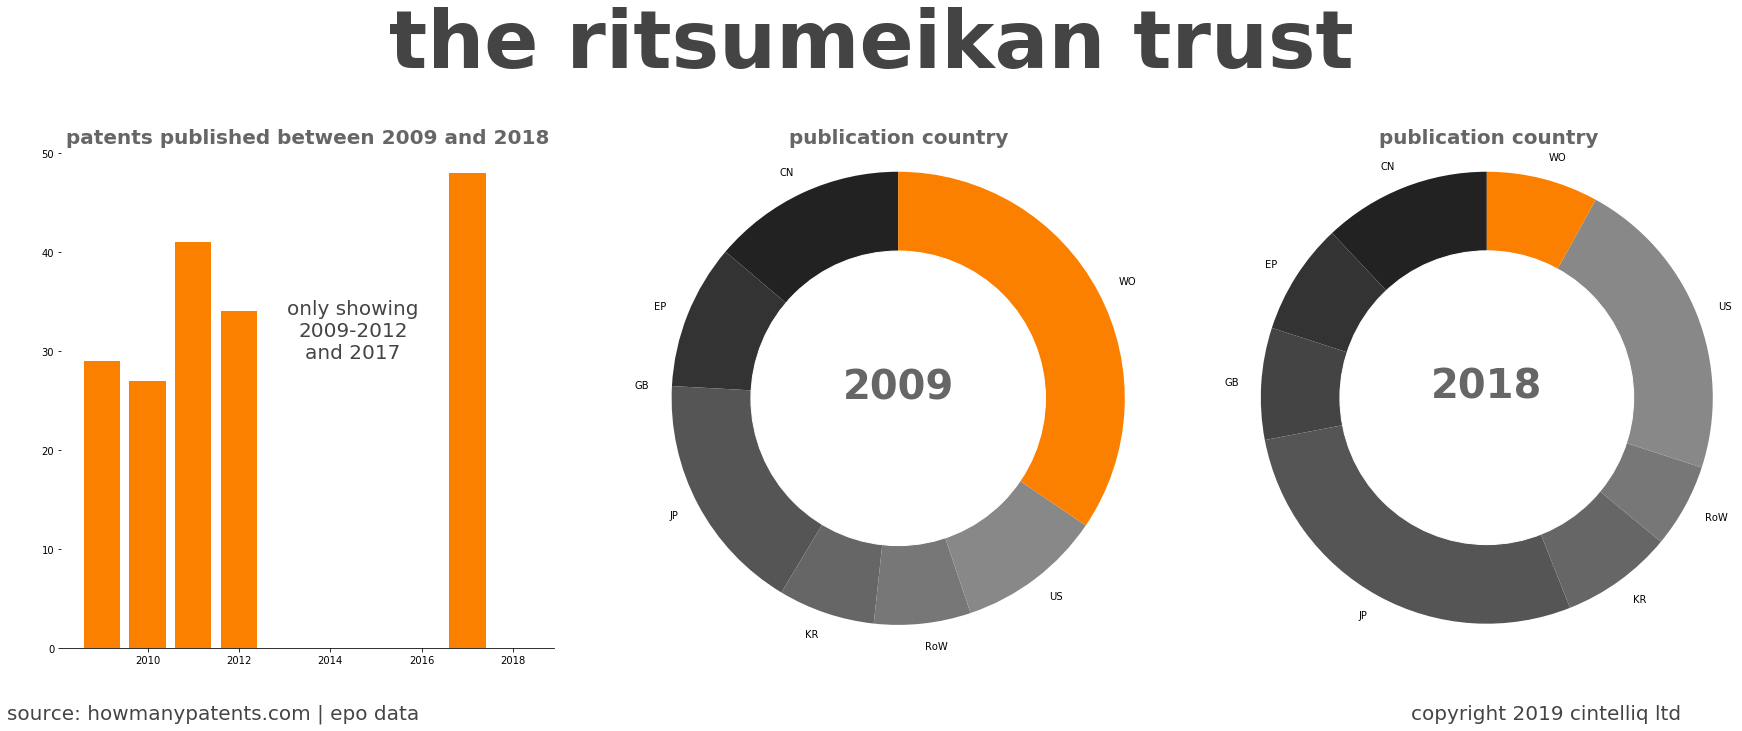 summary of patents for The Ritsumeikan Trust